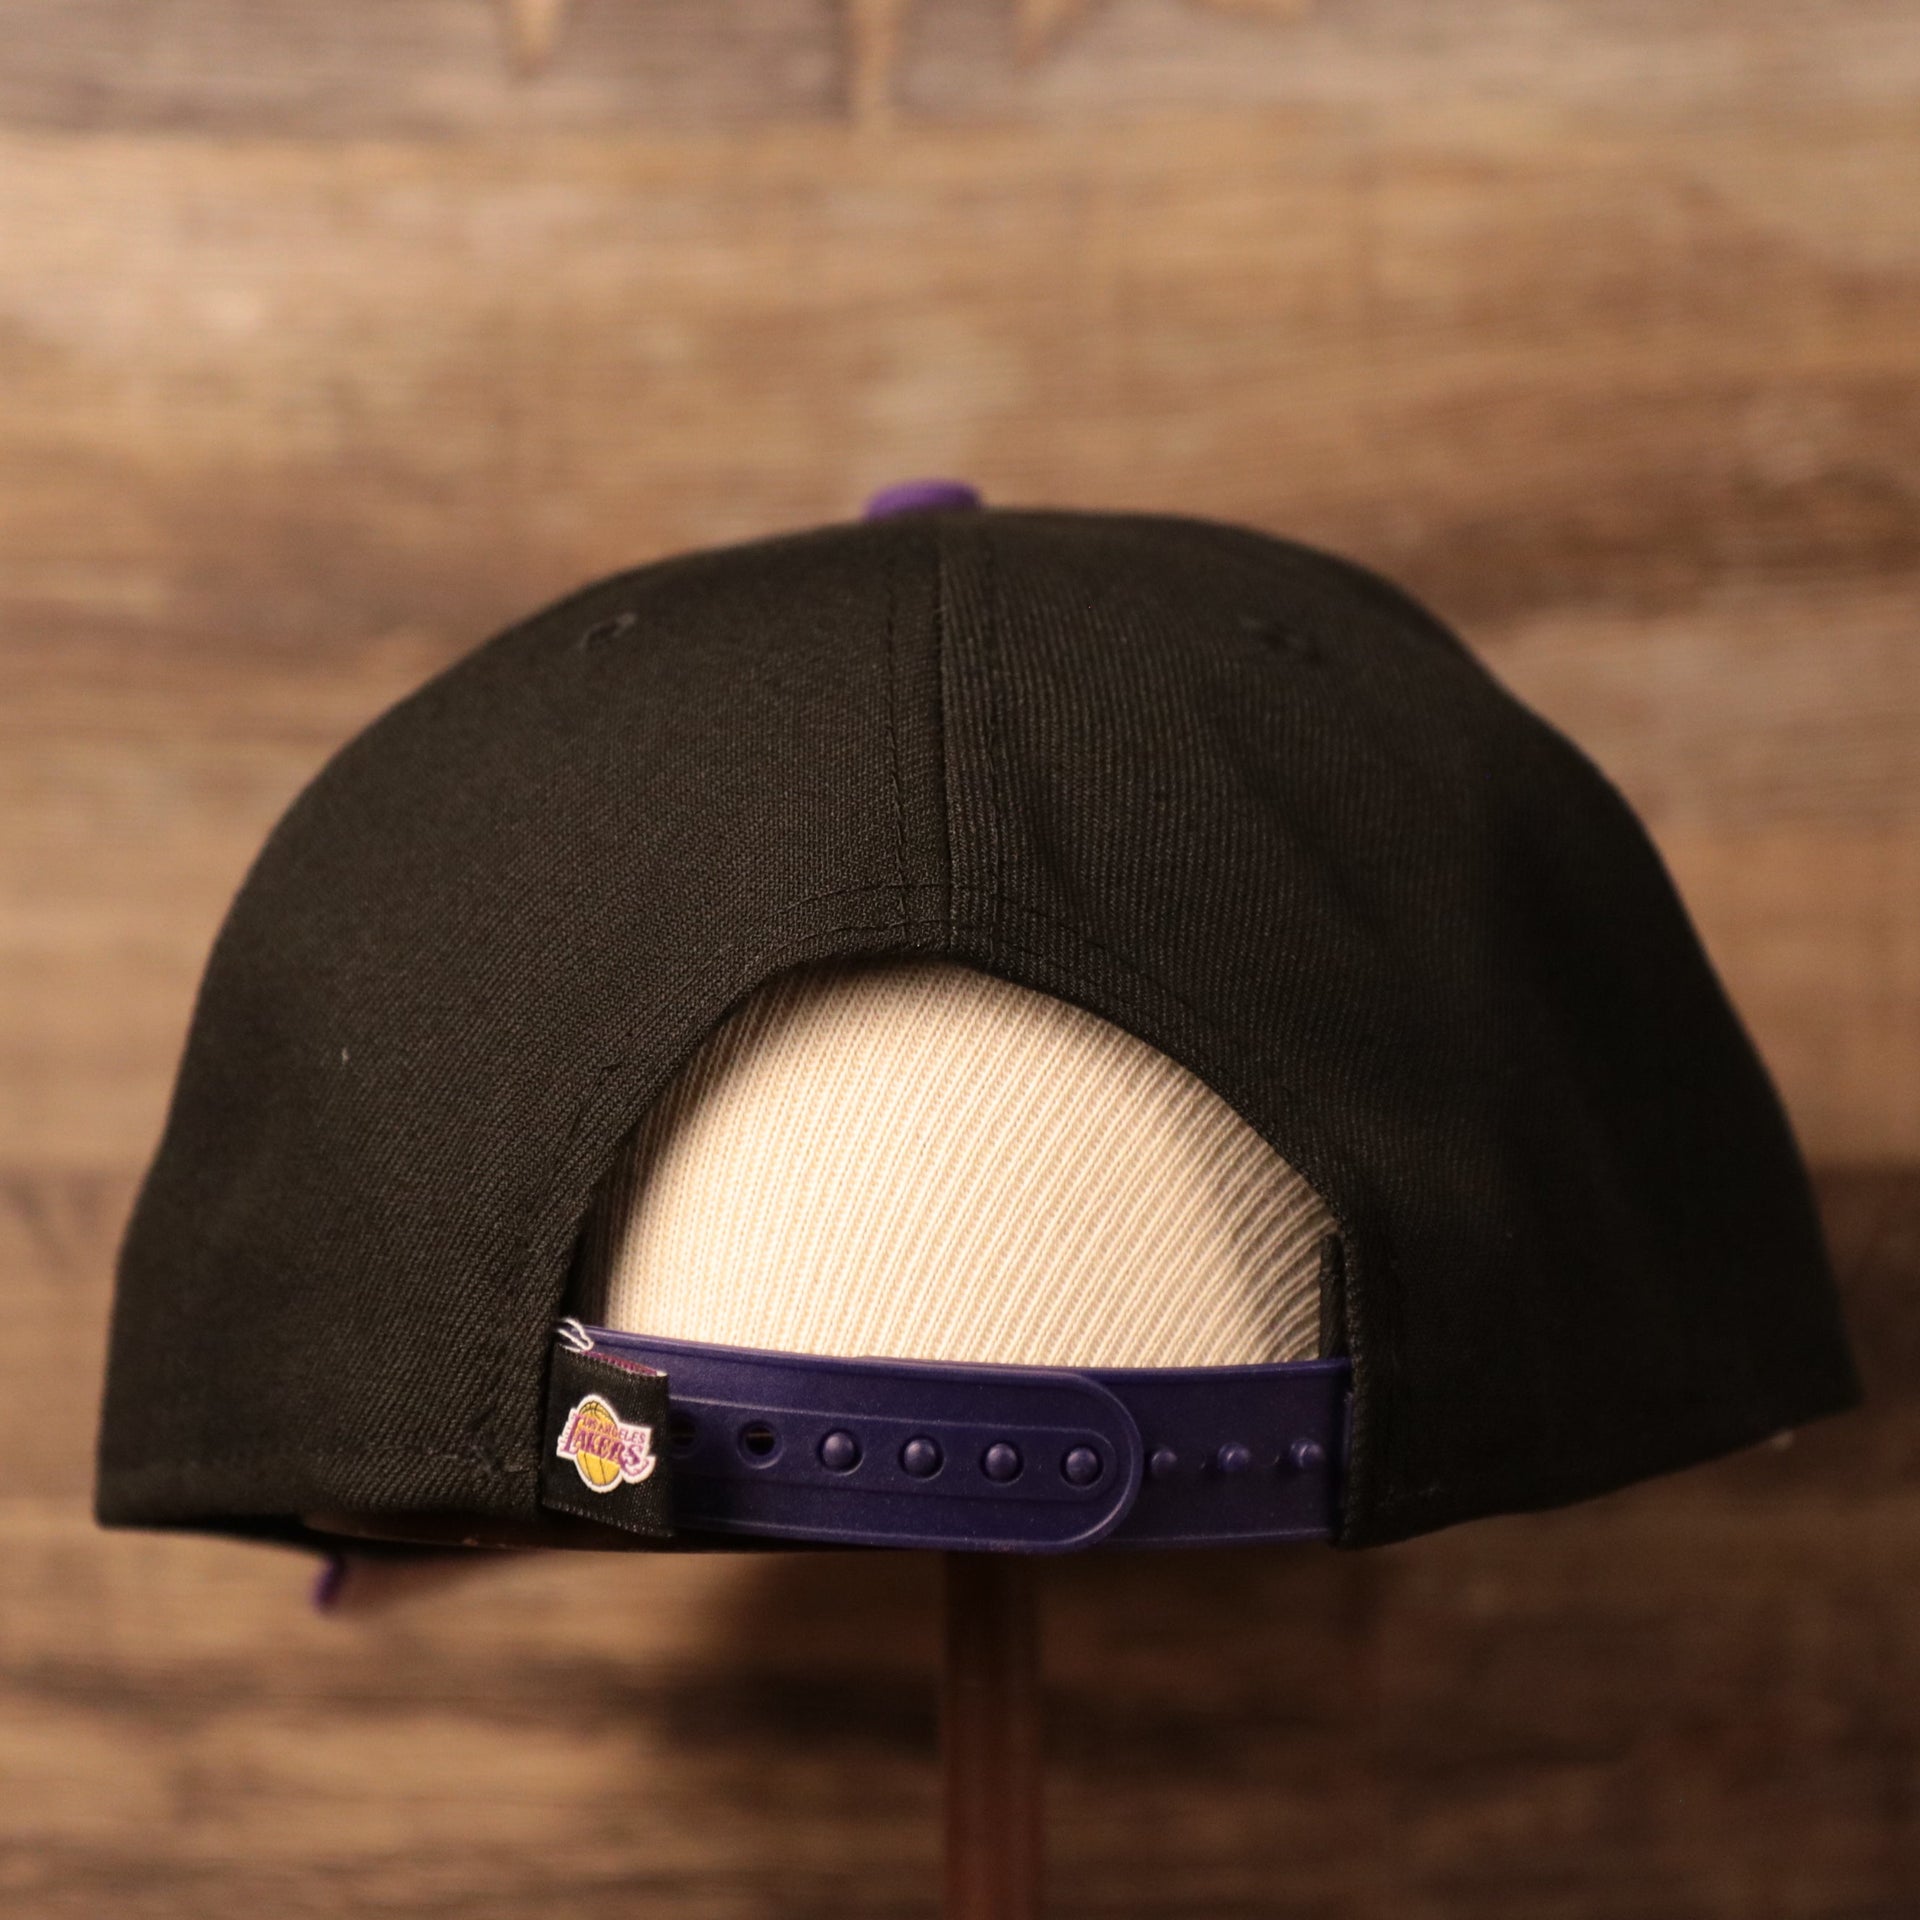 The adjustable strap of the Los Angeles Lakers black/pruple 950 fitted cap.